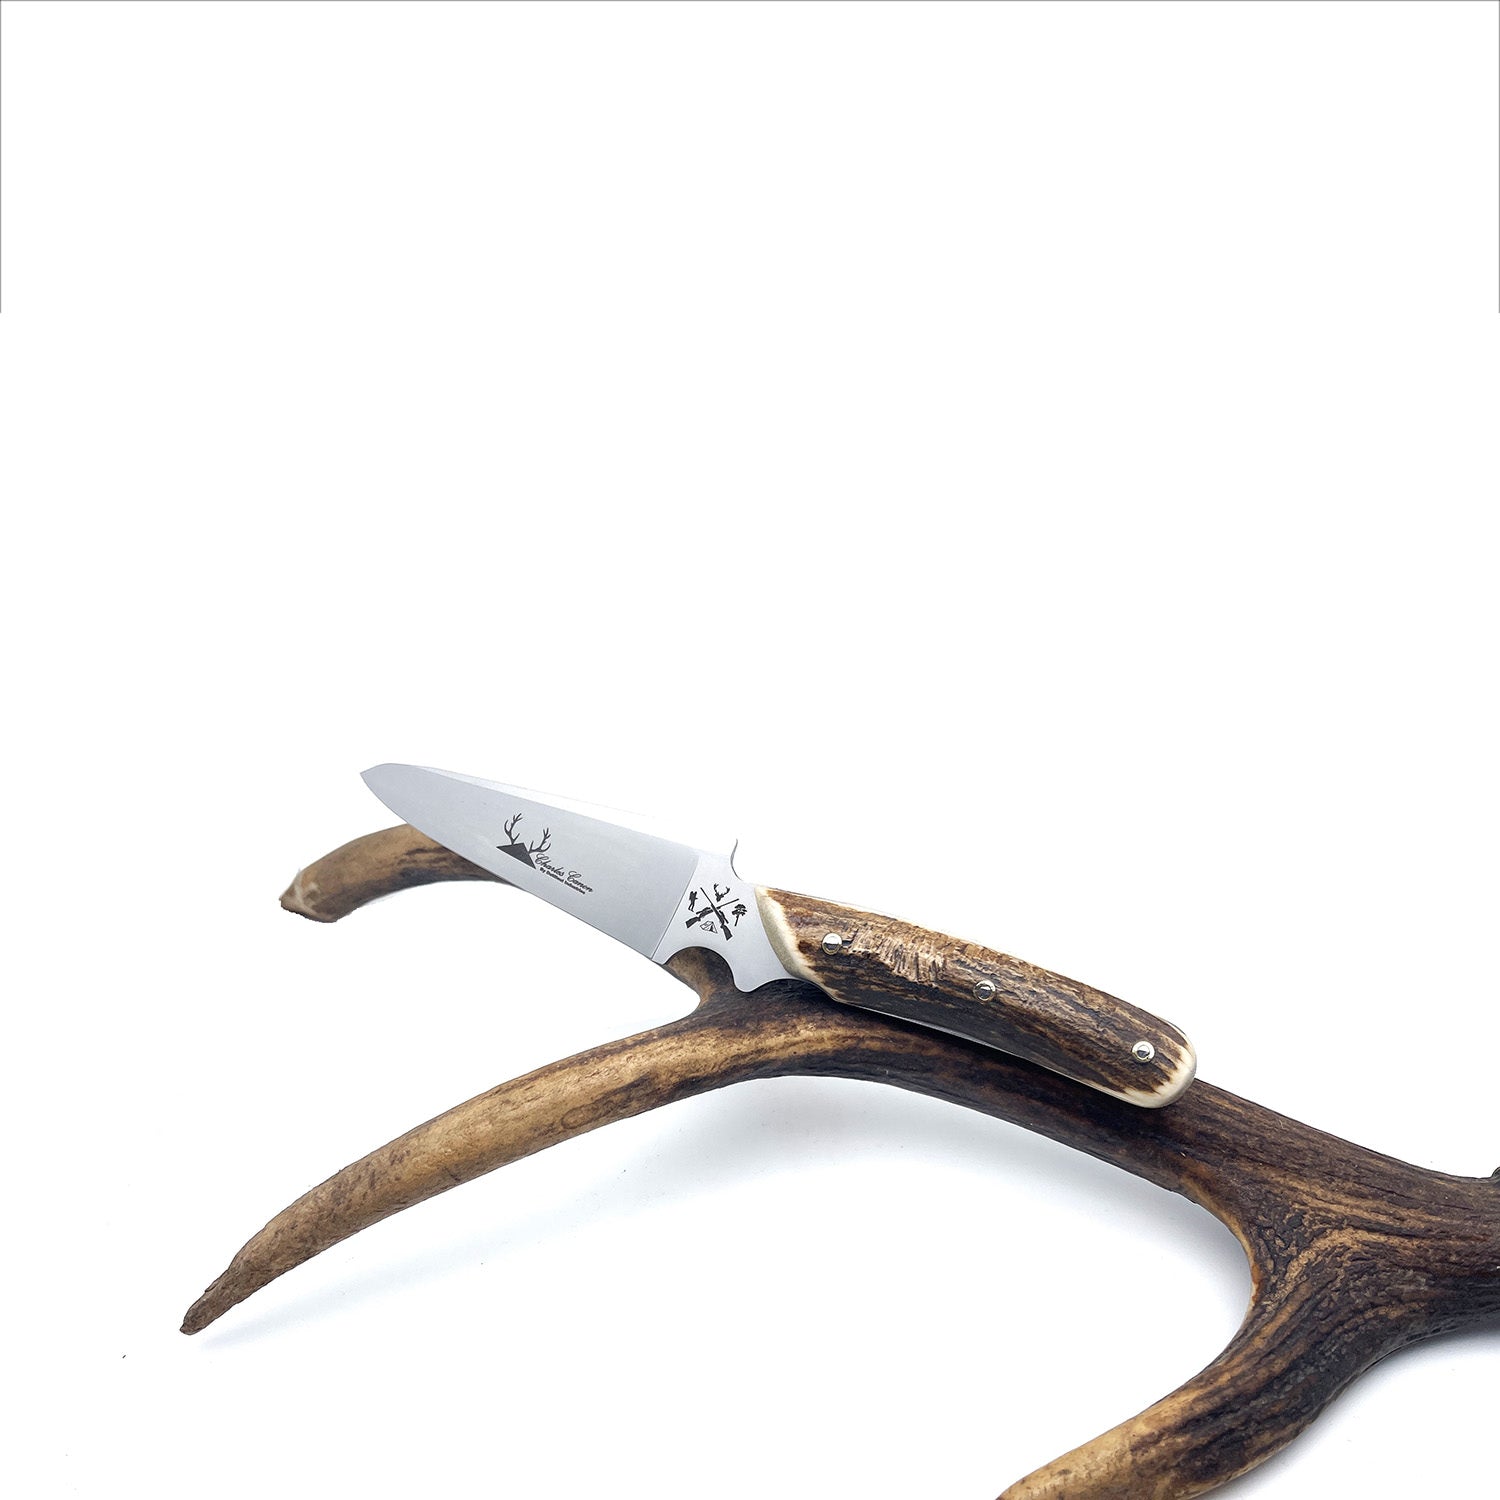 Hunting knife with its deer antler handle